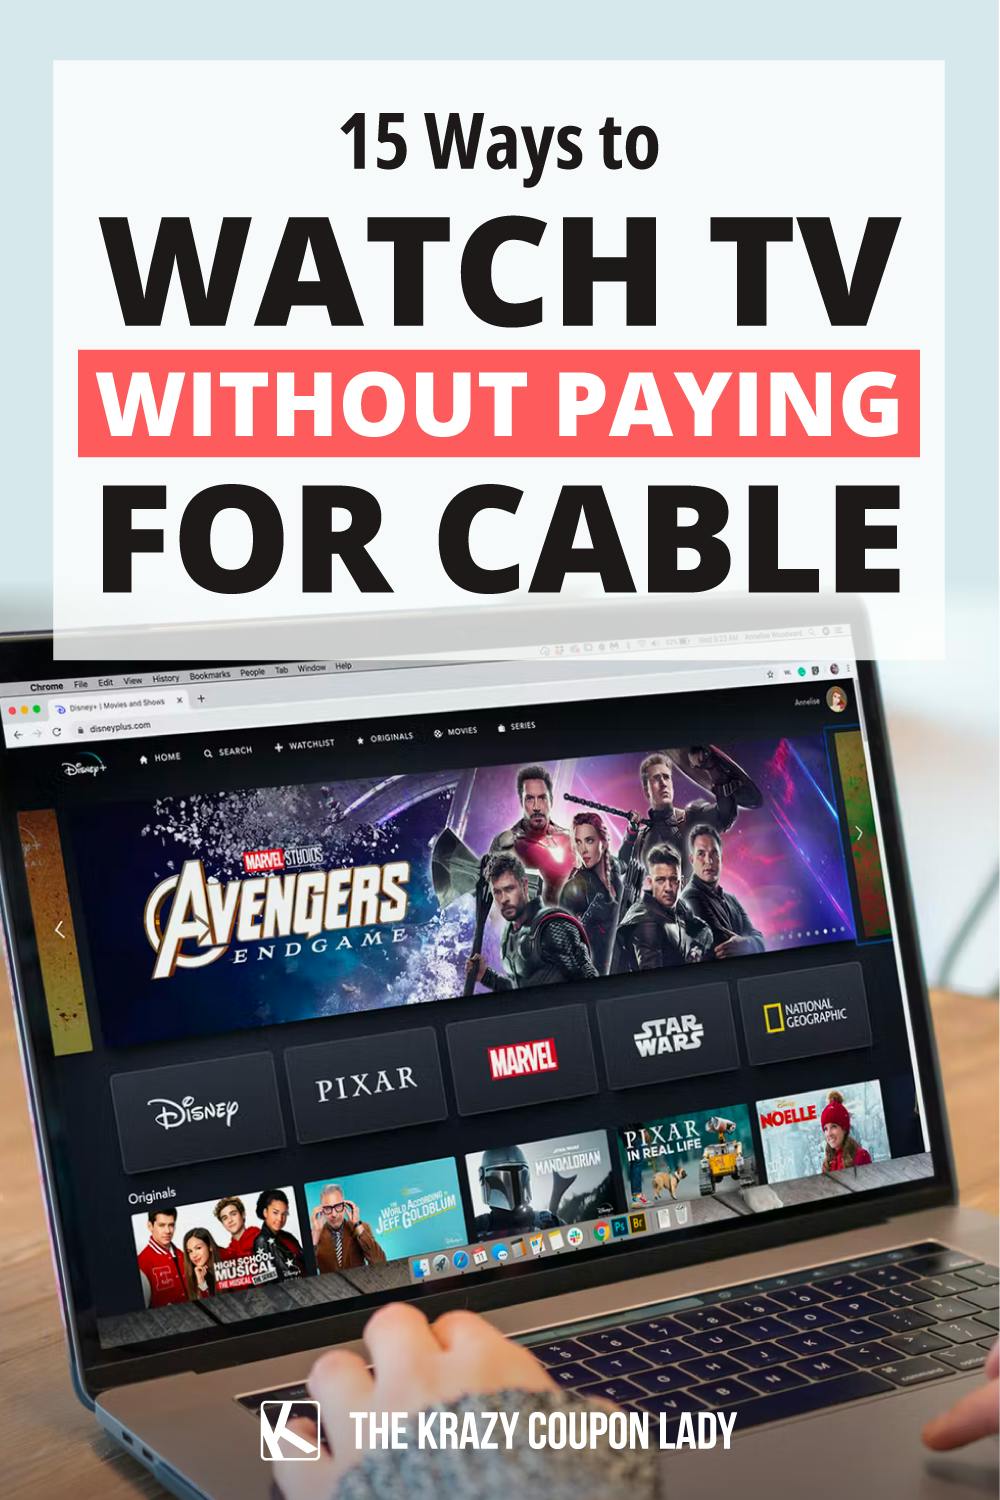 15 Ways to Watch TV Without Paying for Cable